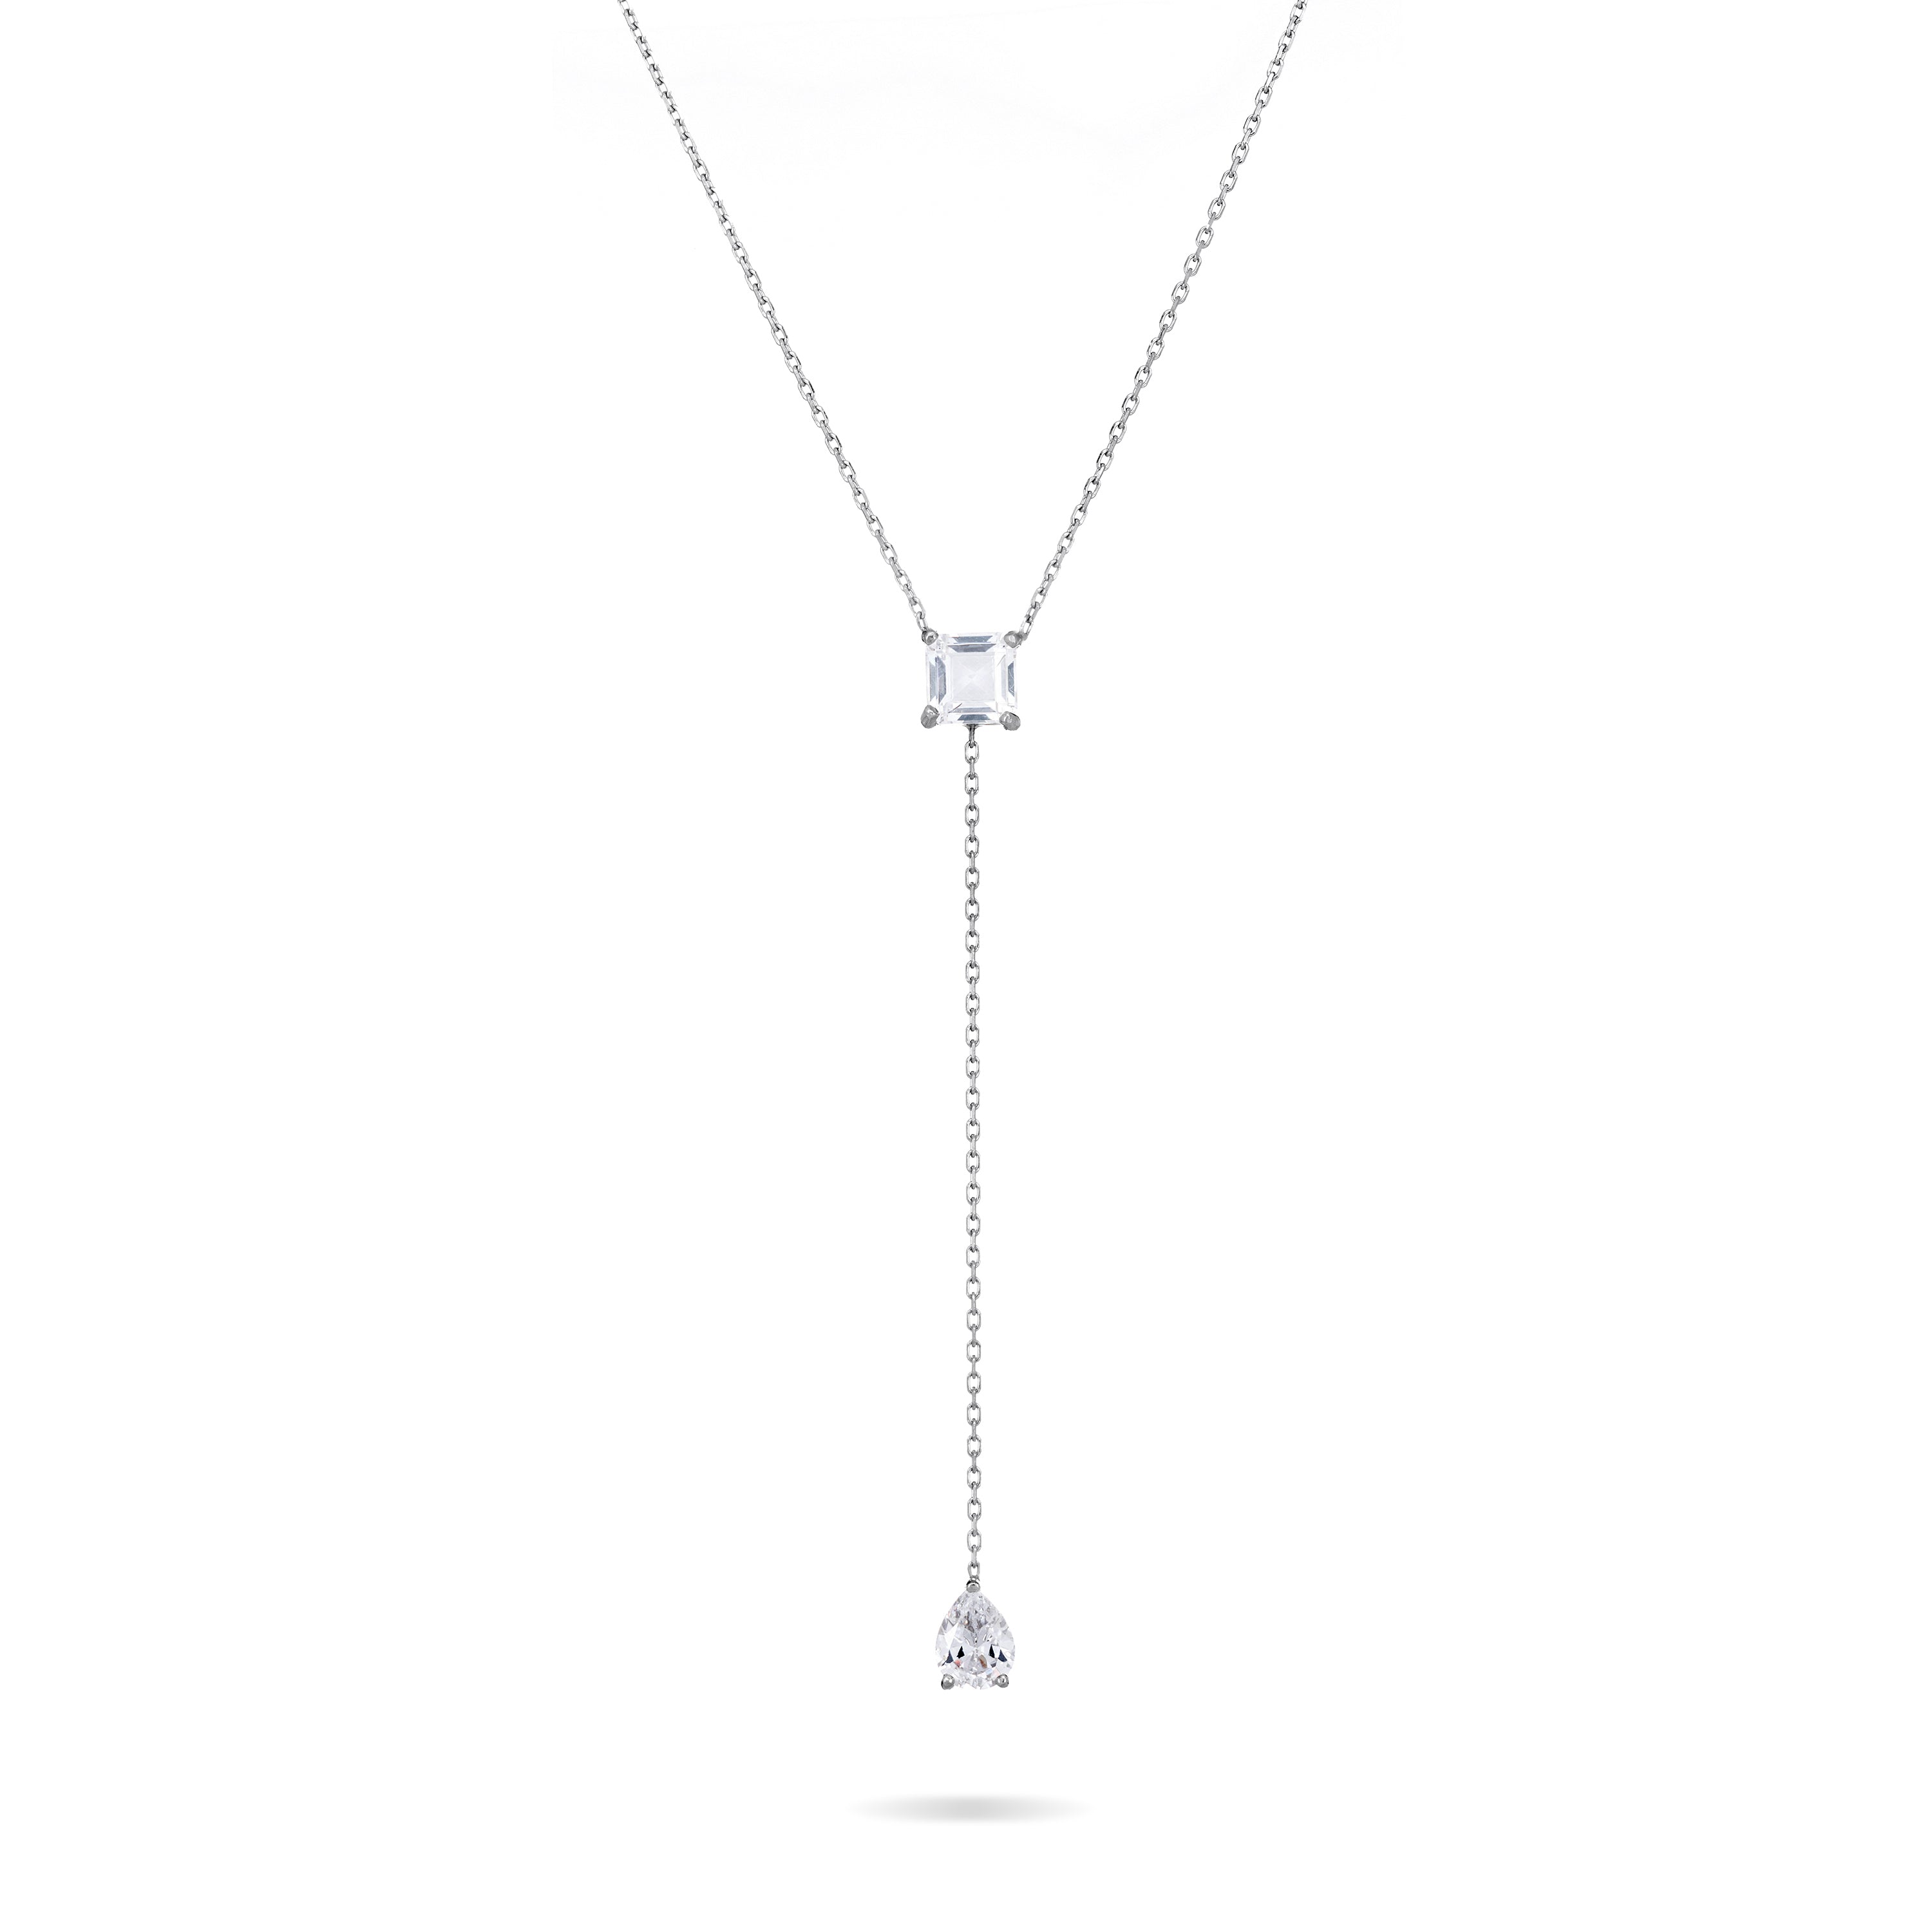 Teardrop And Square Lariat Chain Necklace